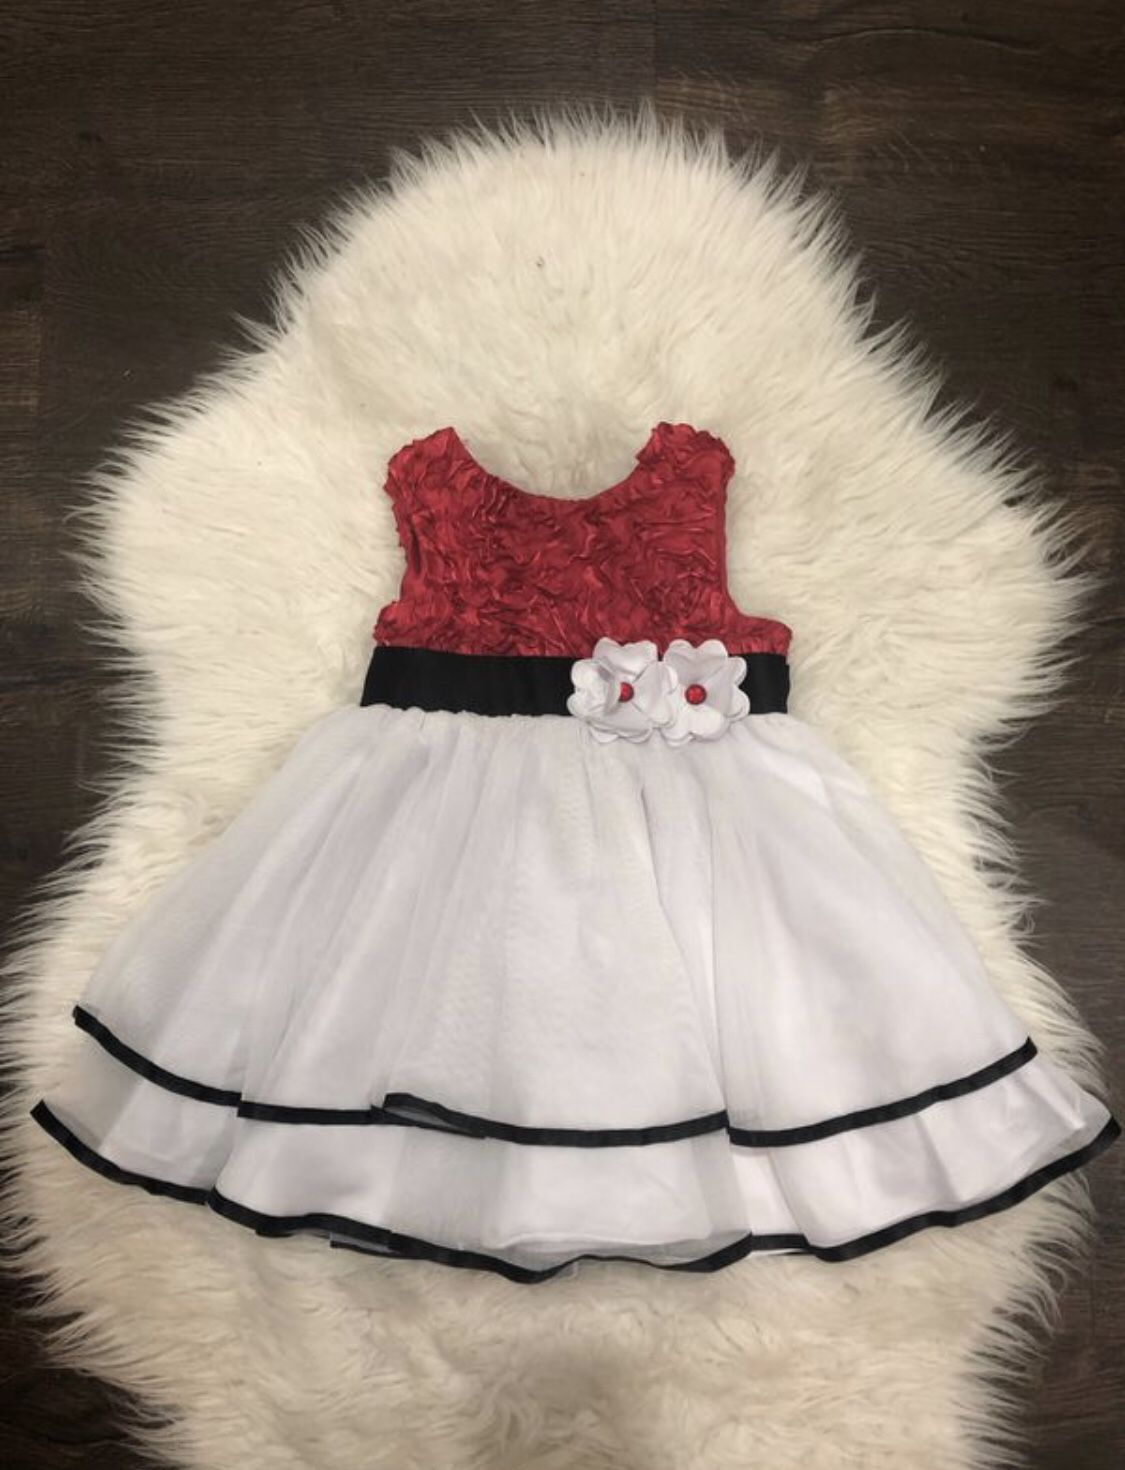 Red and white party dress 24 mths